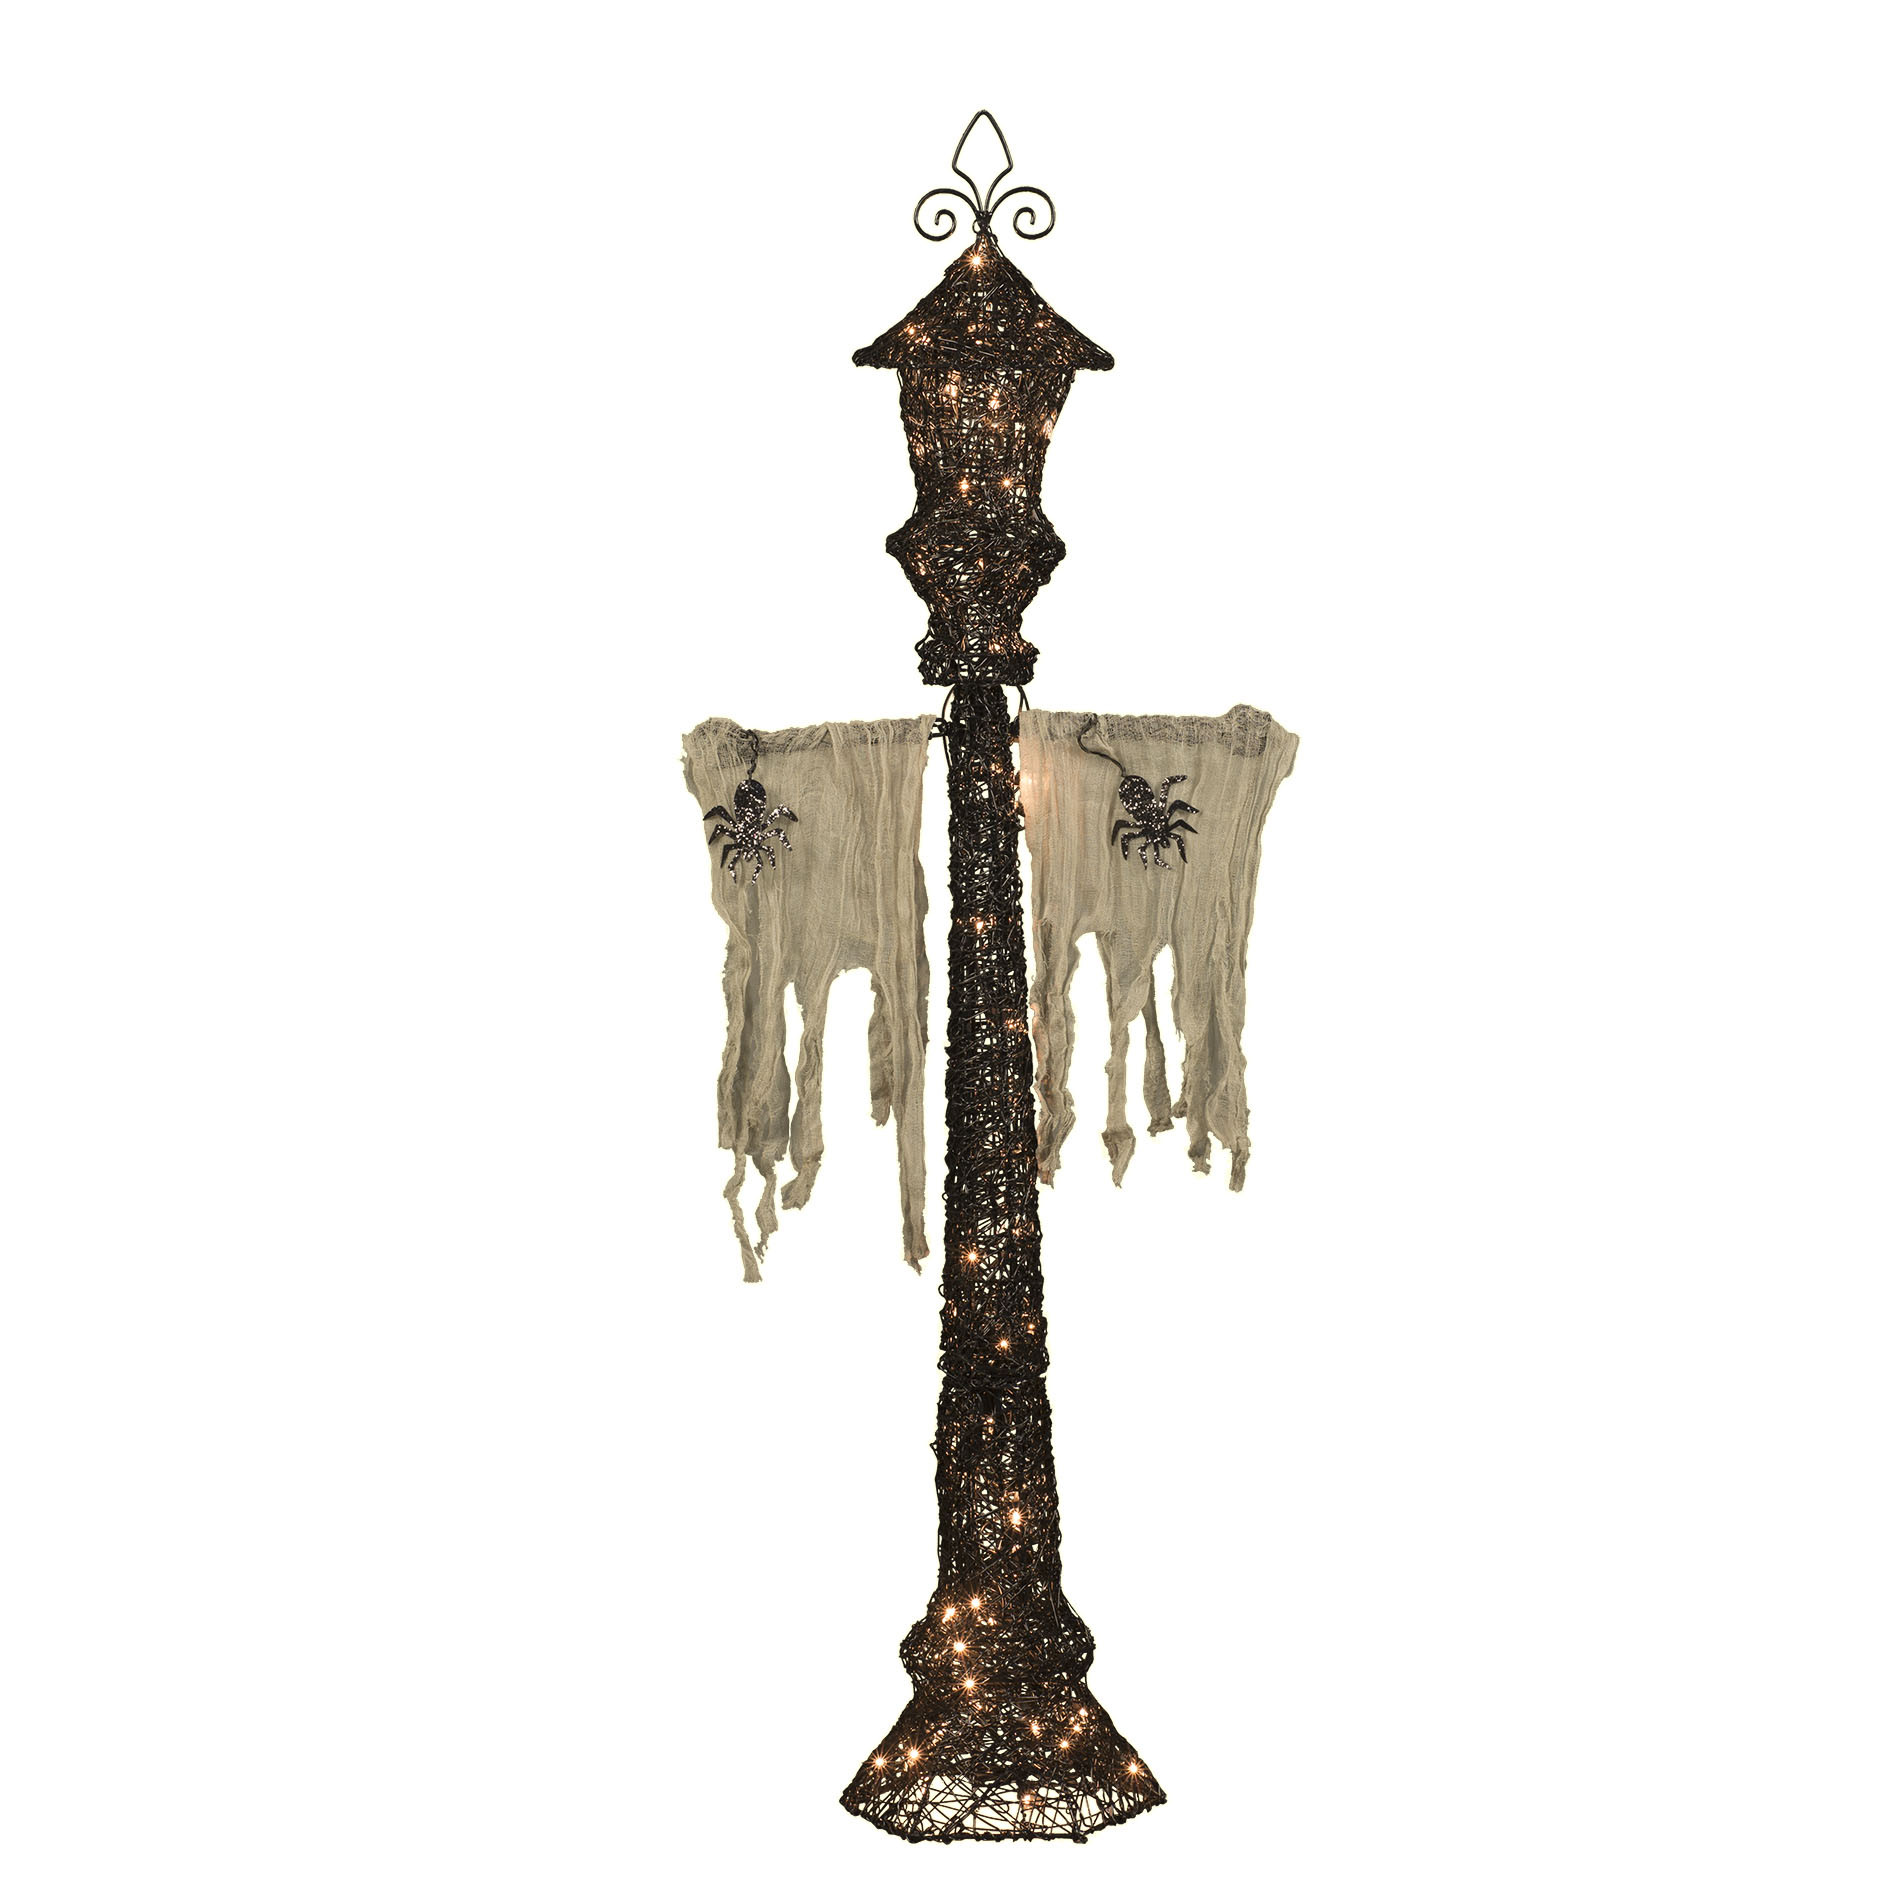 Halloween Lamp Post Decorations
 Totally Ghoul Halloween Lamp Post with Spider 48in 70ct